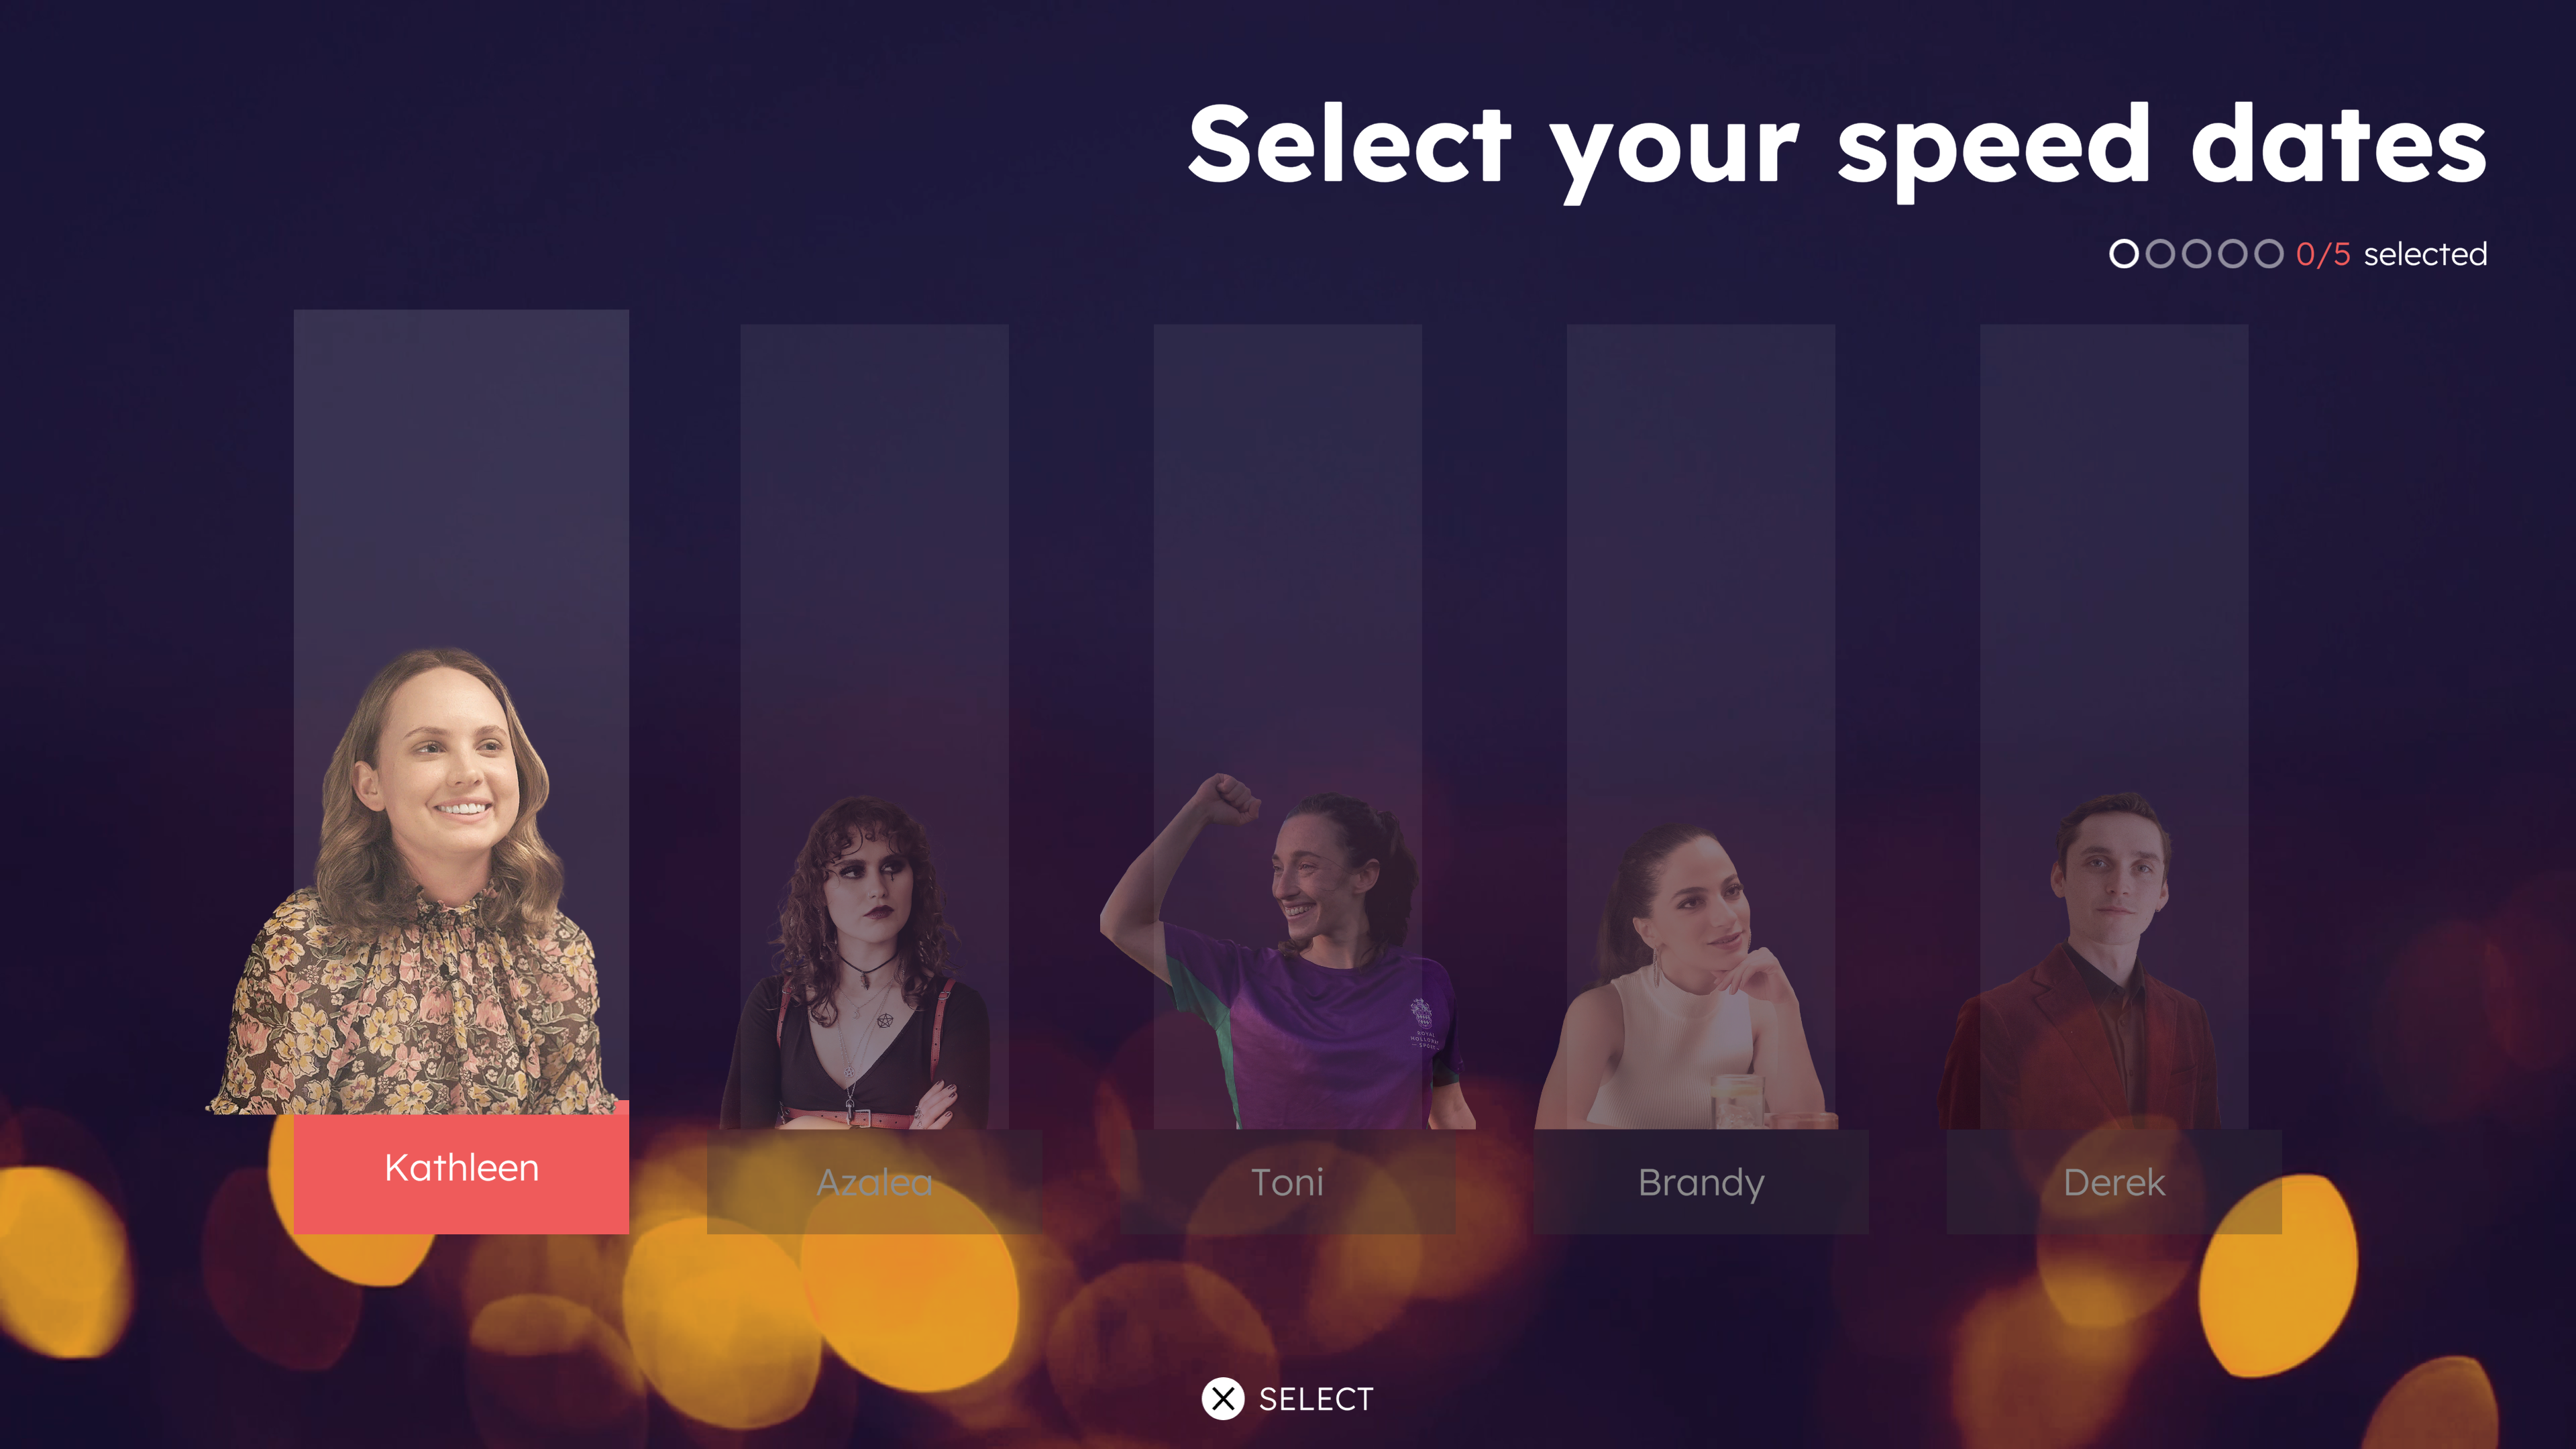 Ten Dates speed date selection screen showing the available dates that you can choose up to a maximum of five